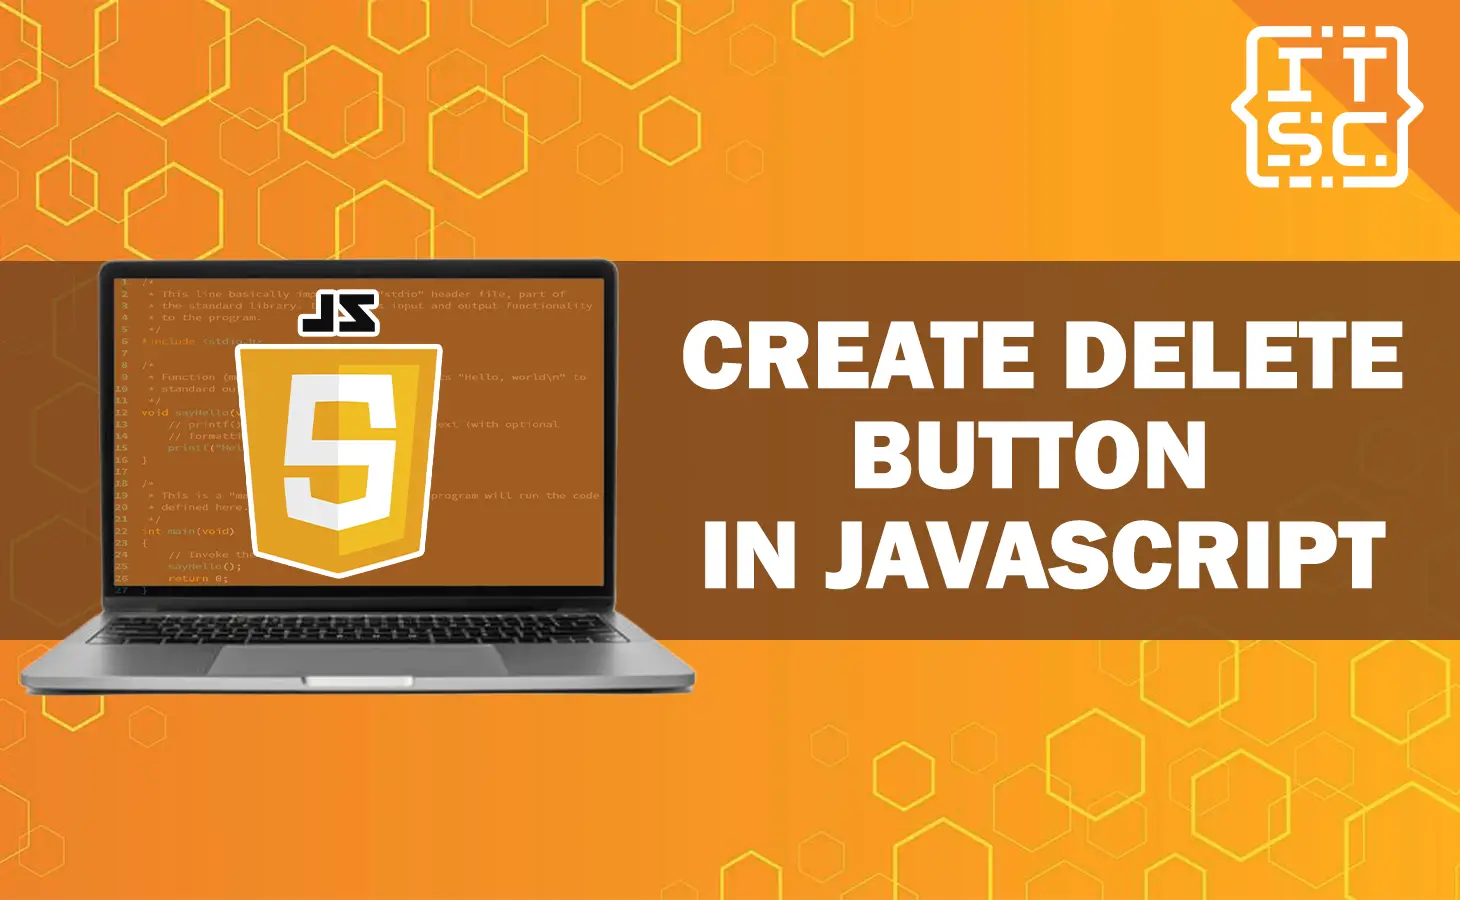 How to Create a Delete Button in JavaScript?